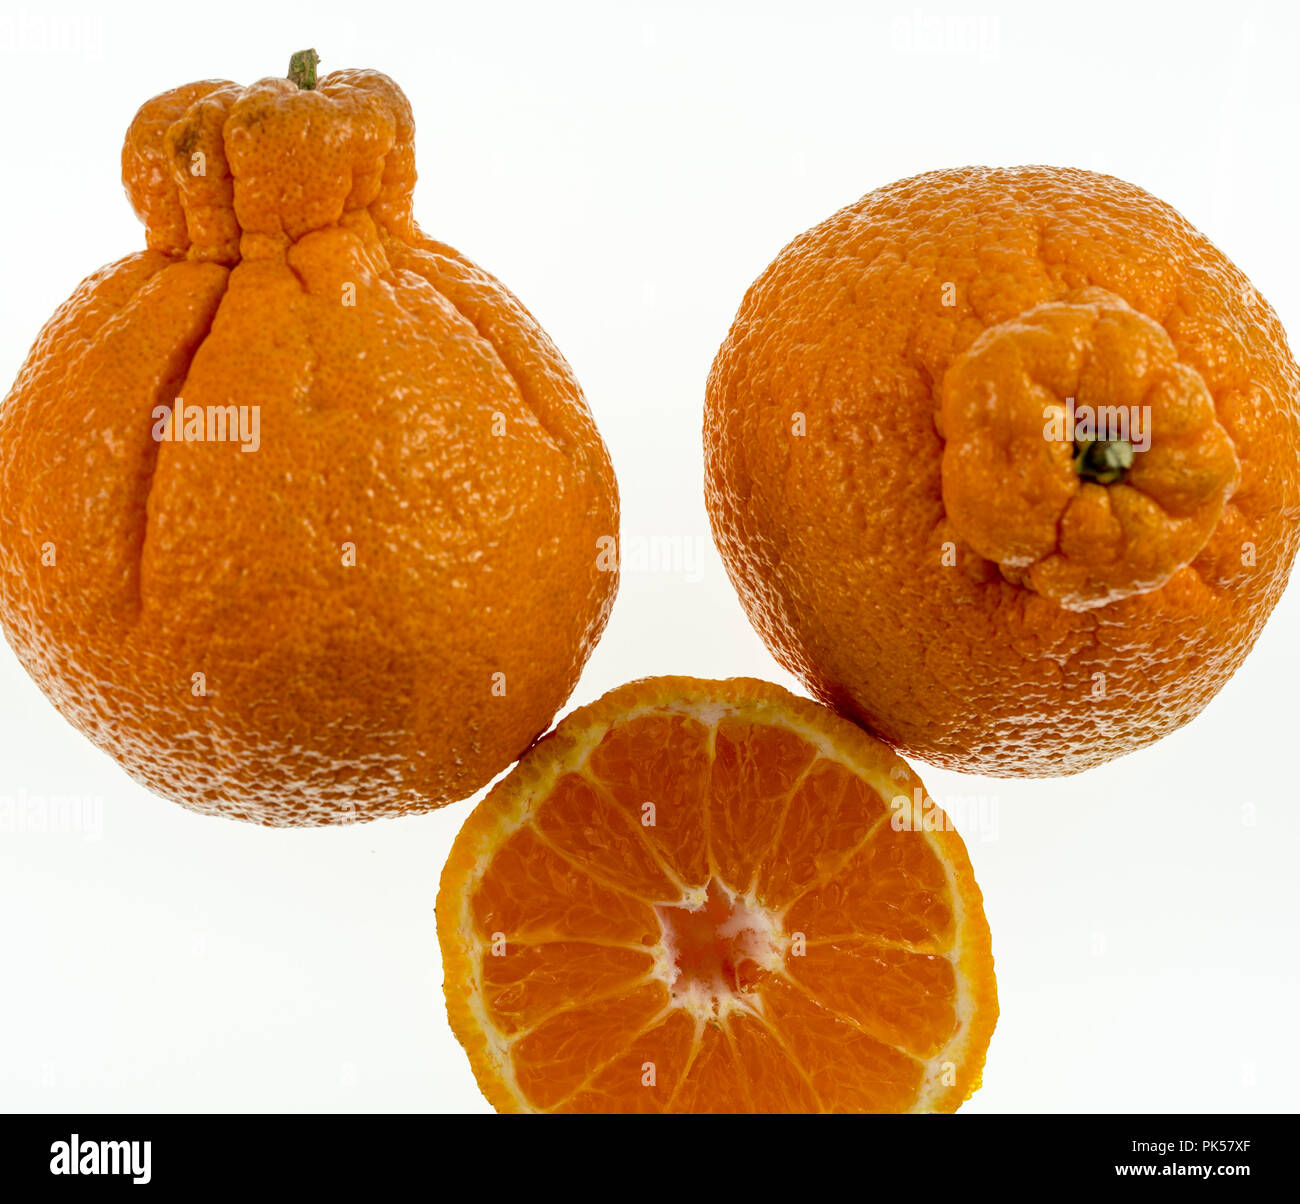 https://c8.alamy.com/comp/PK57XF/sumo-citrus-also-called-dekopon-is-a-seedless-and-sweet-mandarin-variety-distinctive-due-to-its-large-size-and-large-protruding-bump-on-the-top-PK57XF.jpg